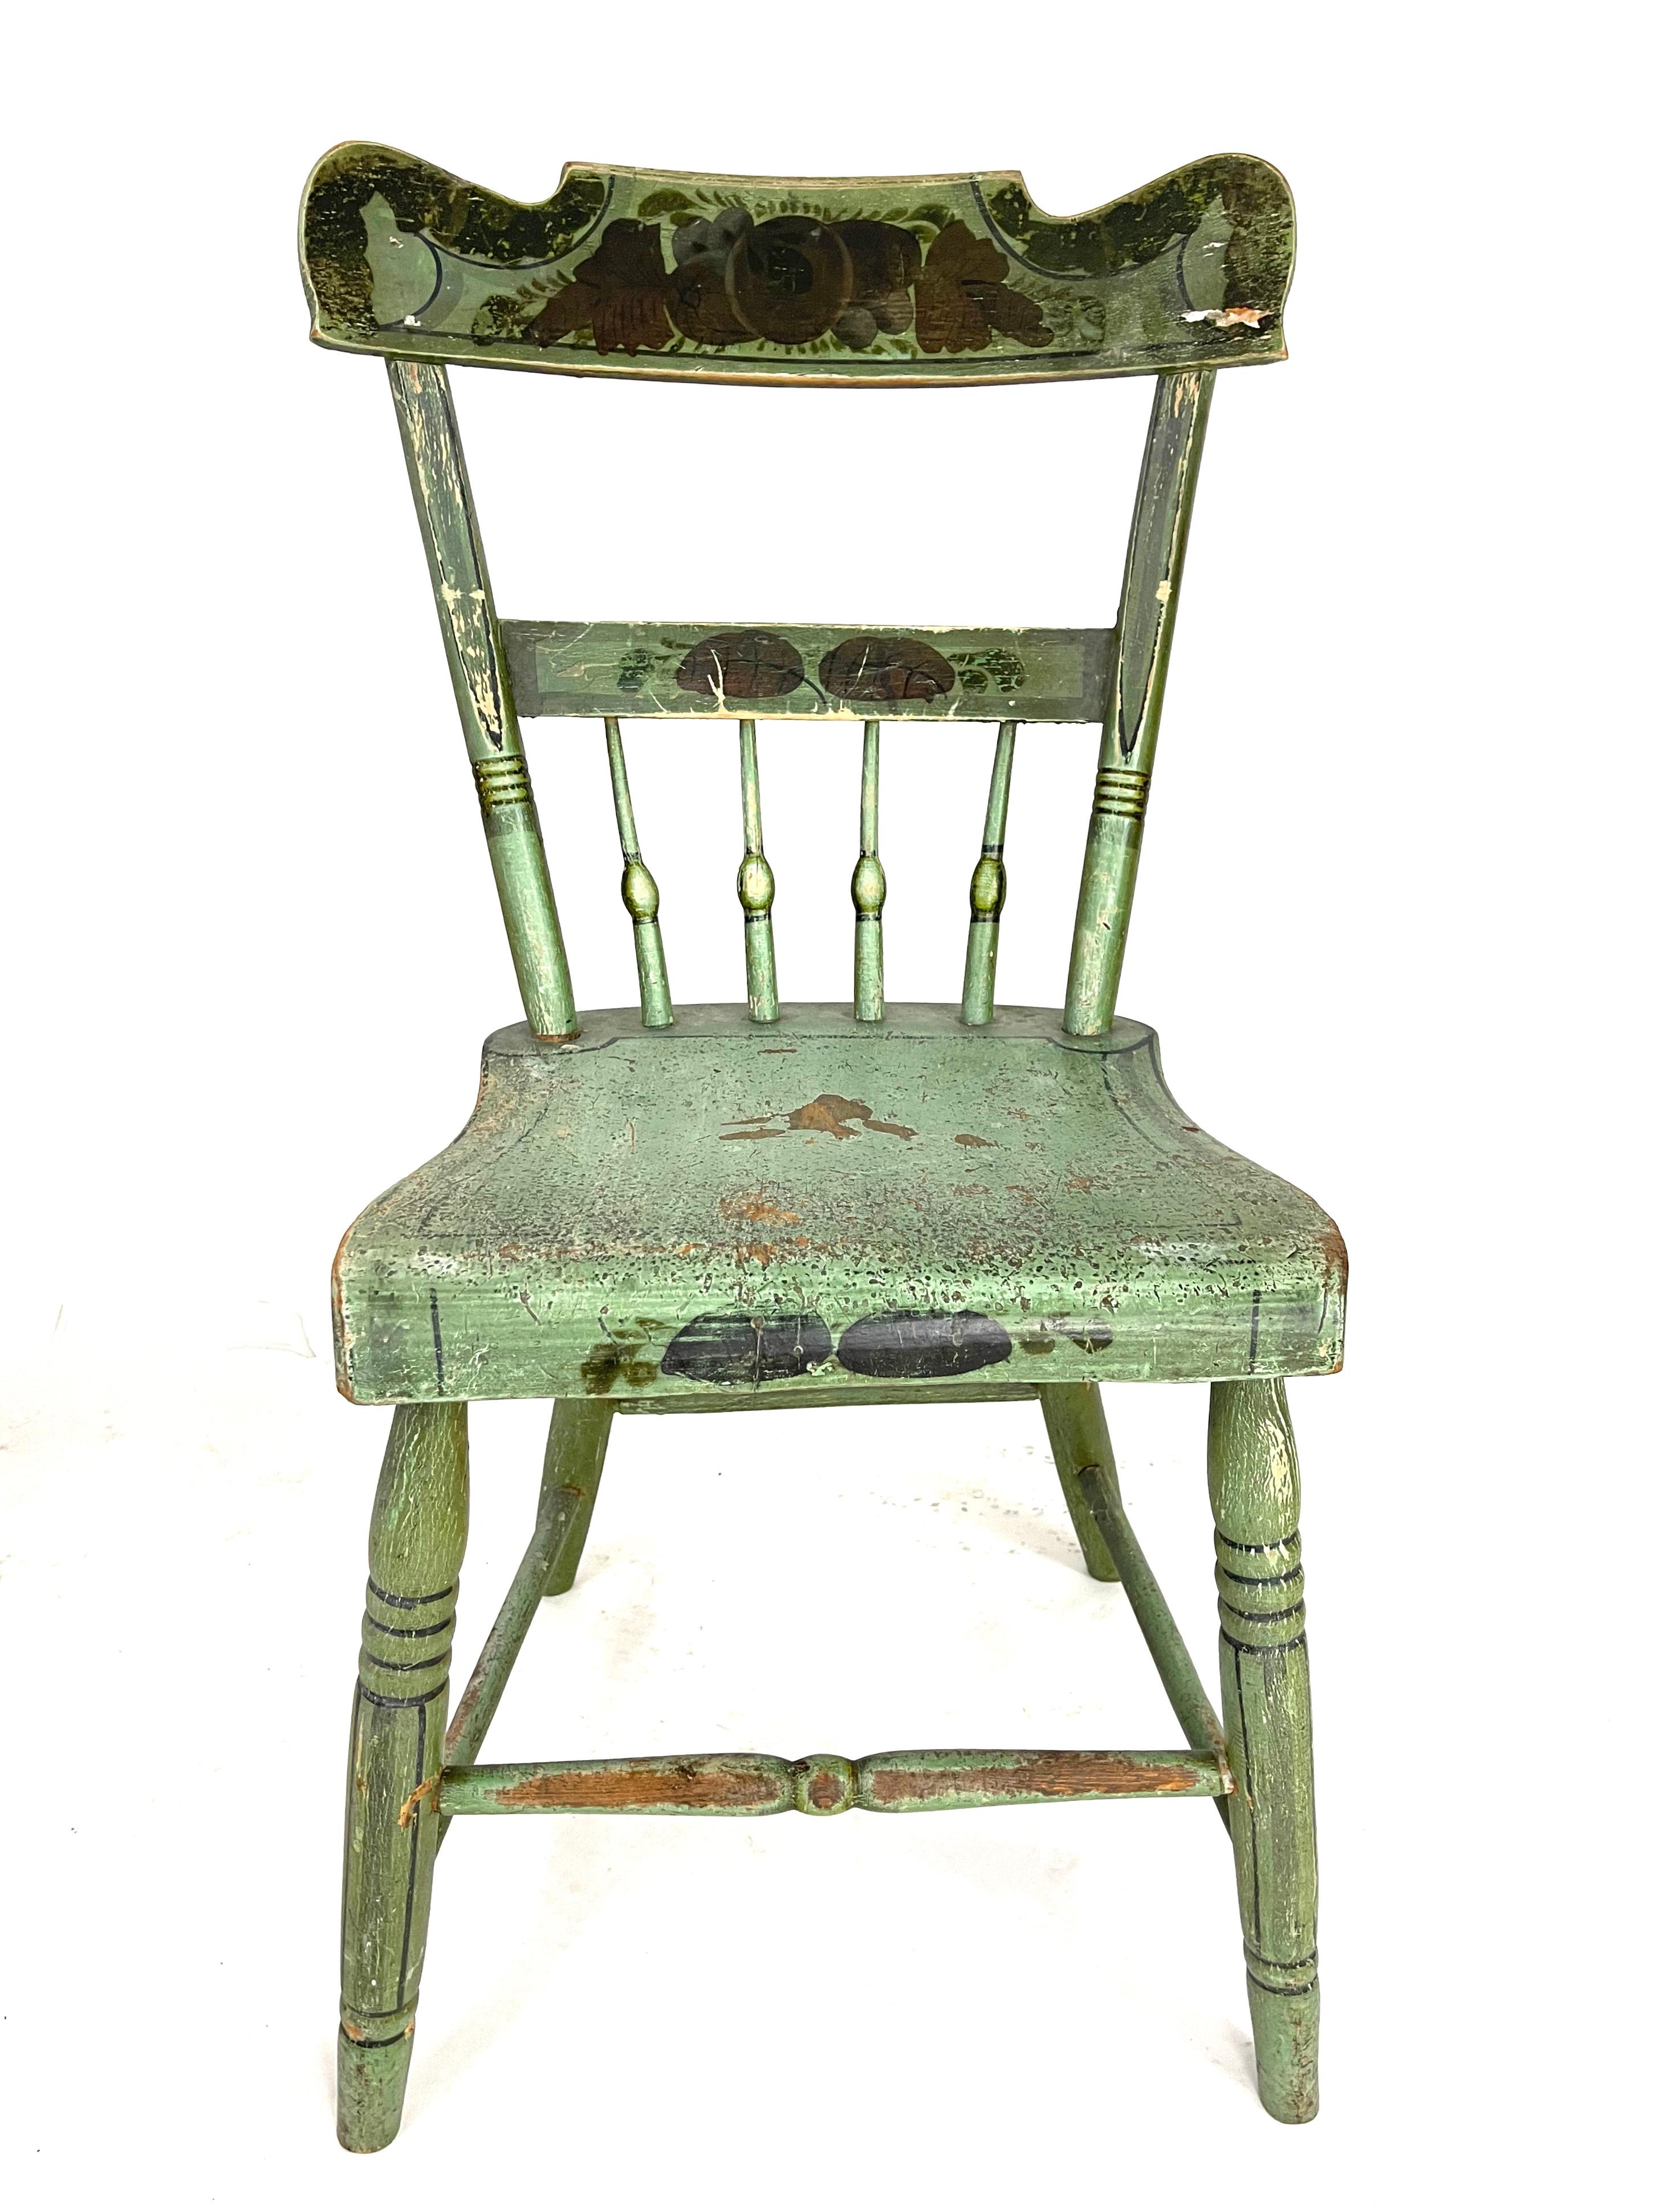 A set of set of six 19th century American country dining chairs retaining their original light green painted surface, the crests of each decorated with stenciled designs of fruit and foliage, possibly New England, circa 1820-30. Beautiful color,